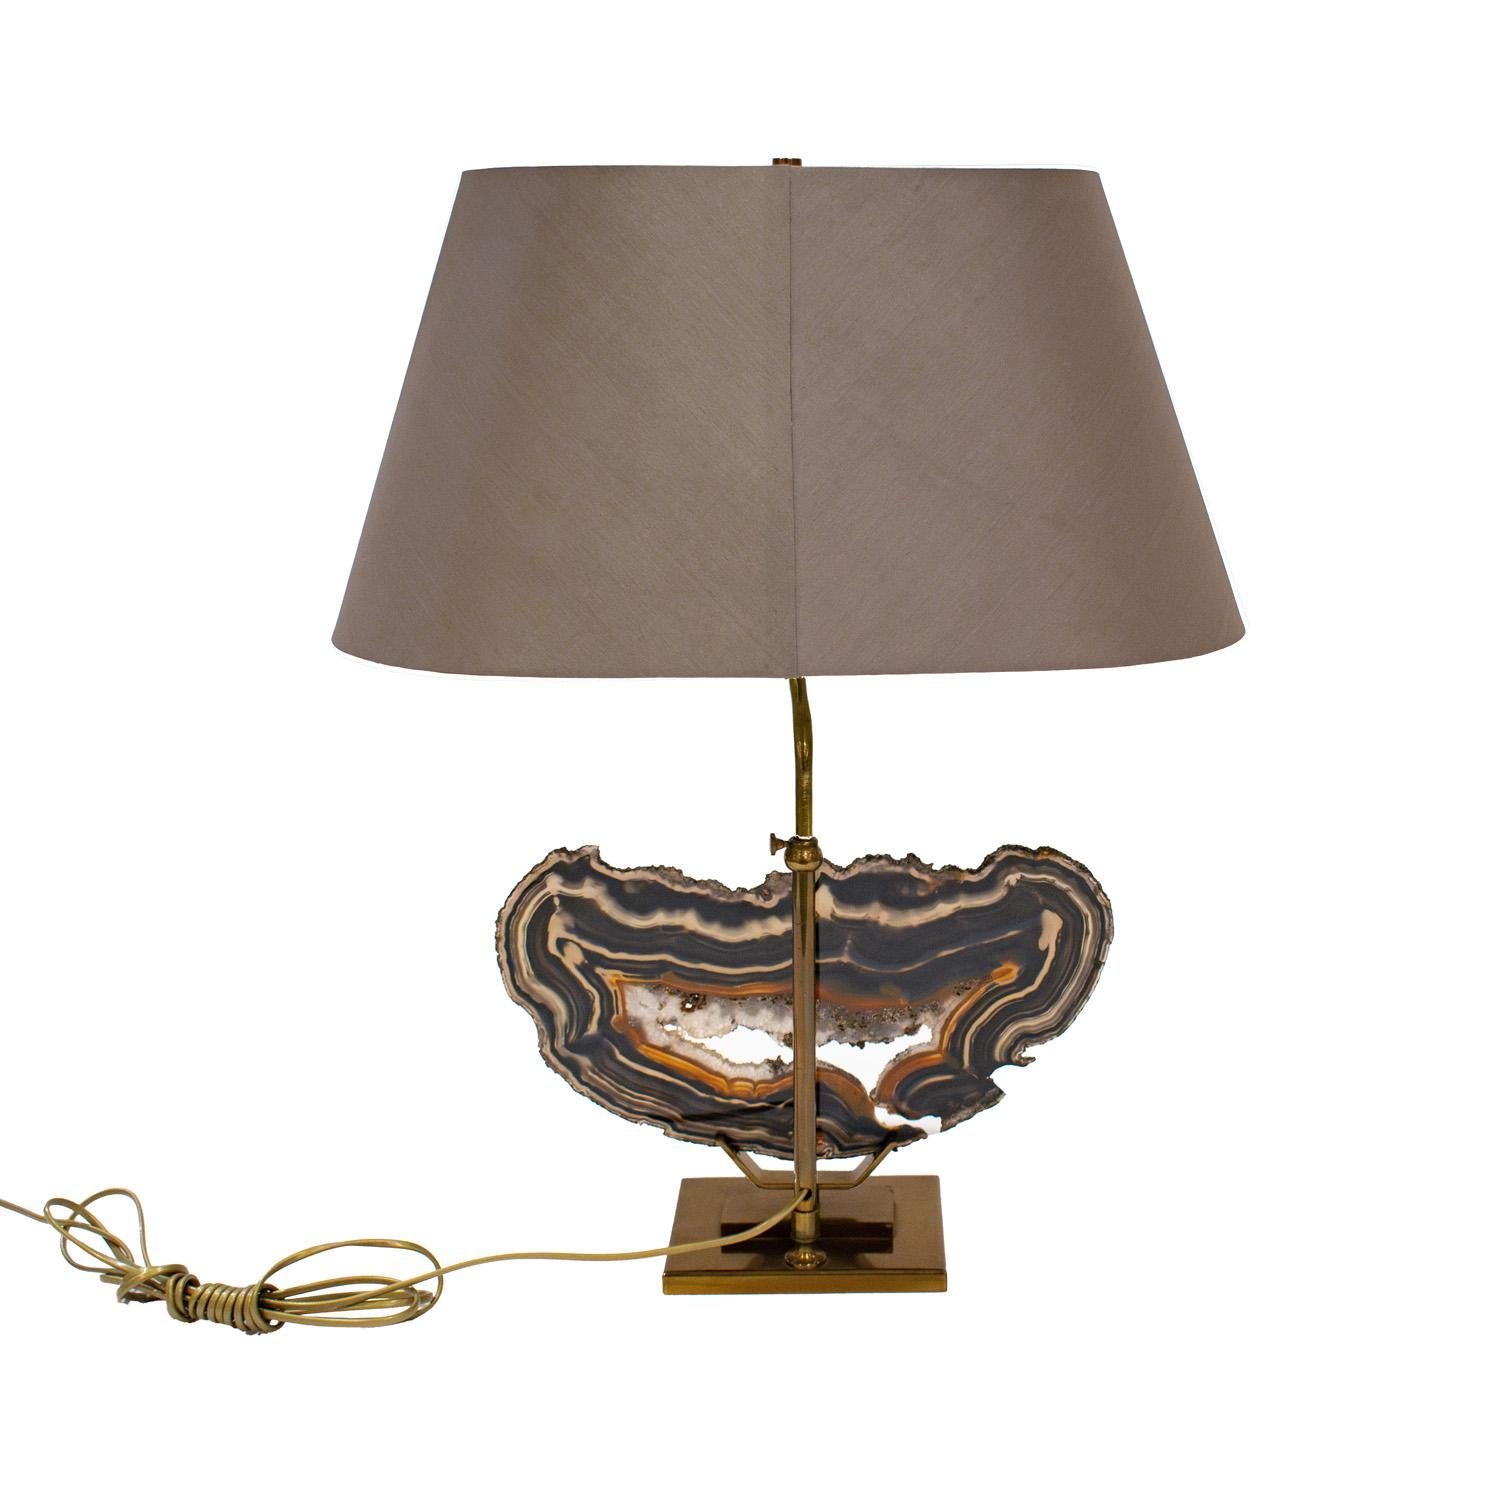 Exquisite Belgian Table Lamp with Mounted Agate 1970s In Excellent Condition For Sale In New York, NY